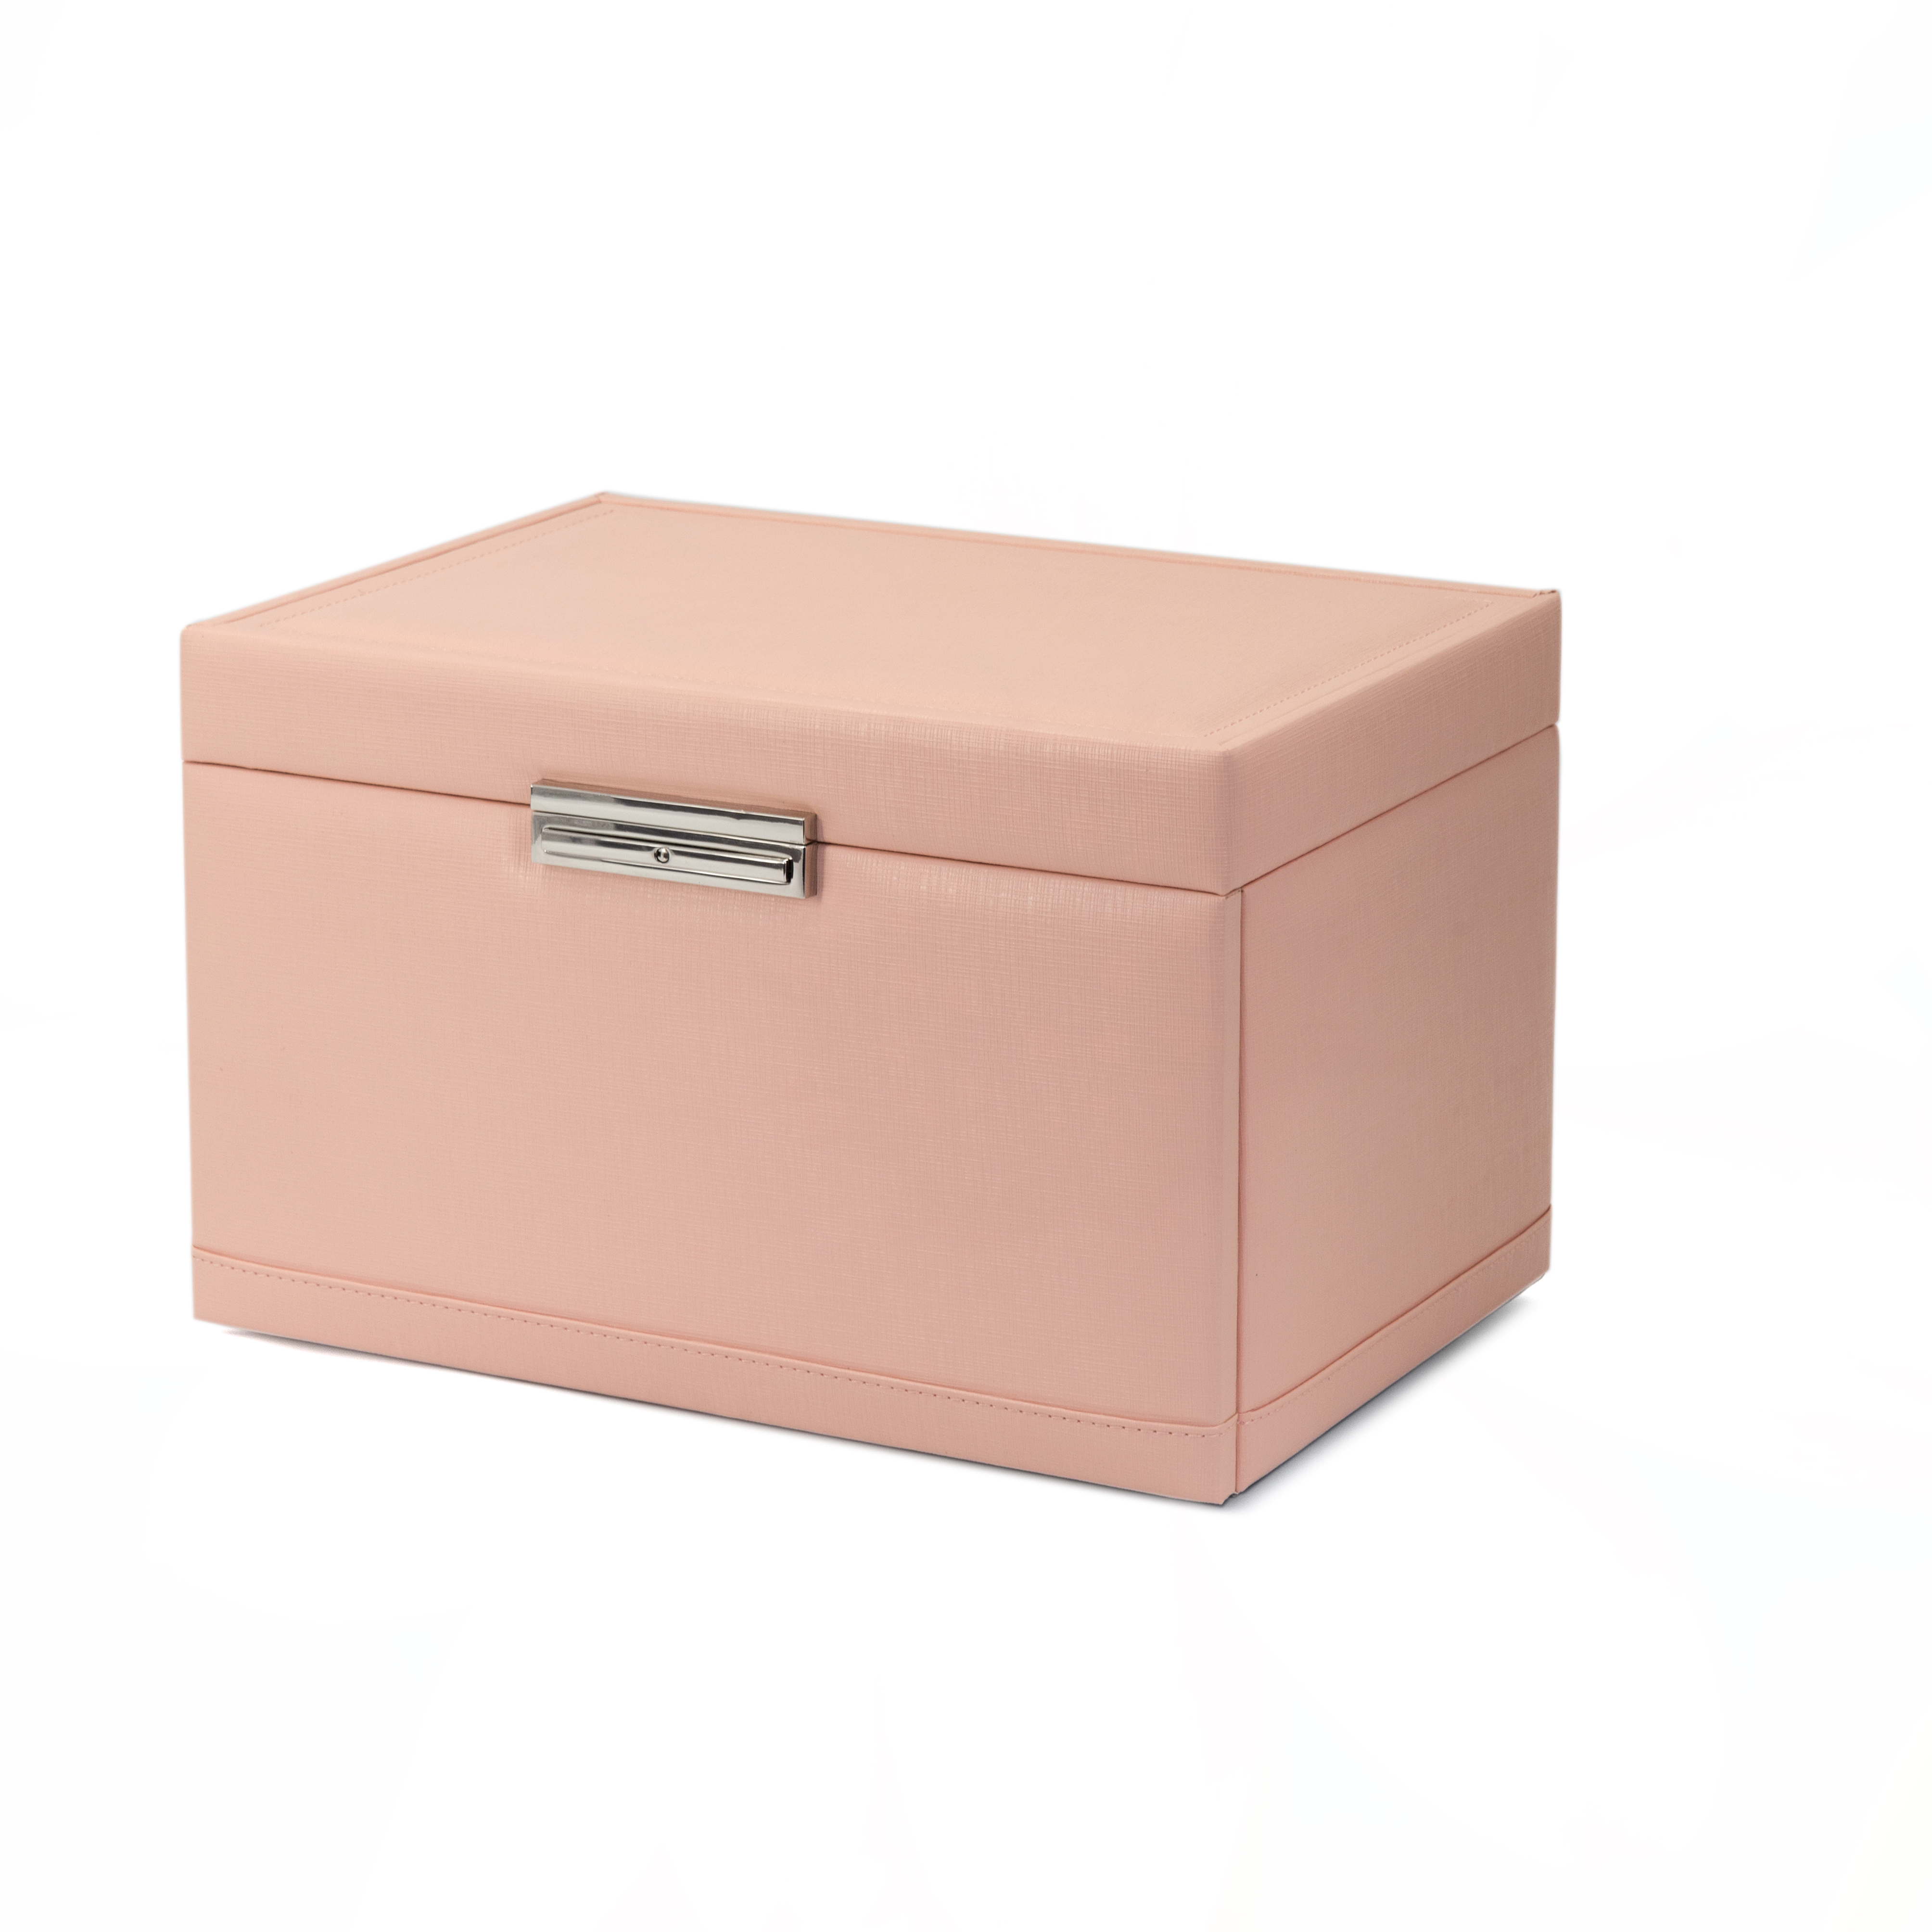 pink leather Drawers for jewelry storage box